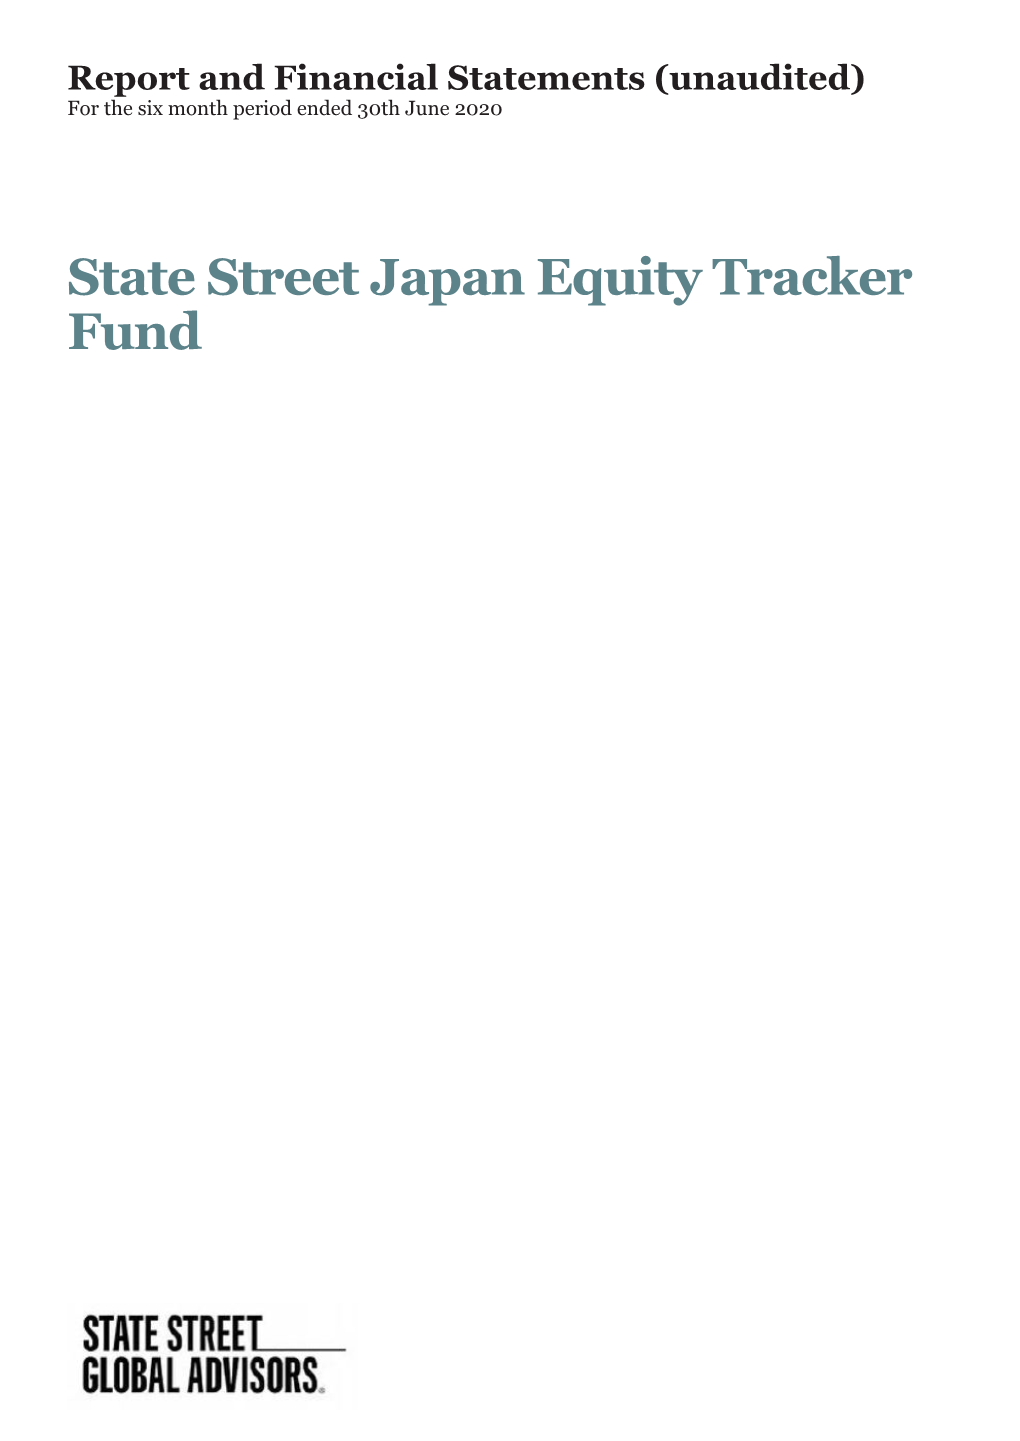 State Street Japan Equity Tracker Fund State Street Japan Equity Tracker Fund